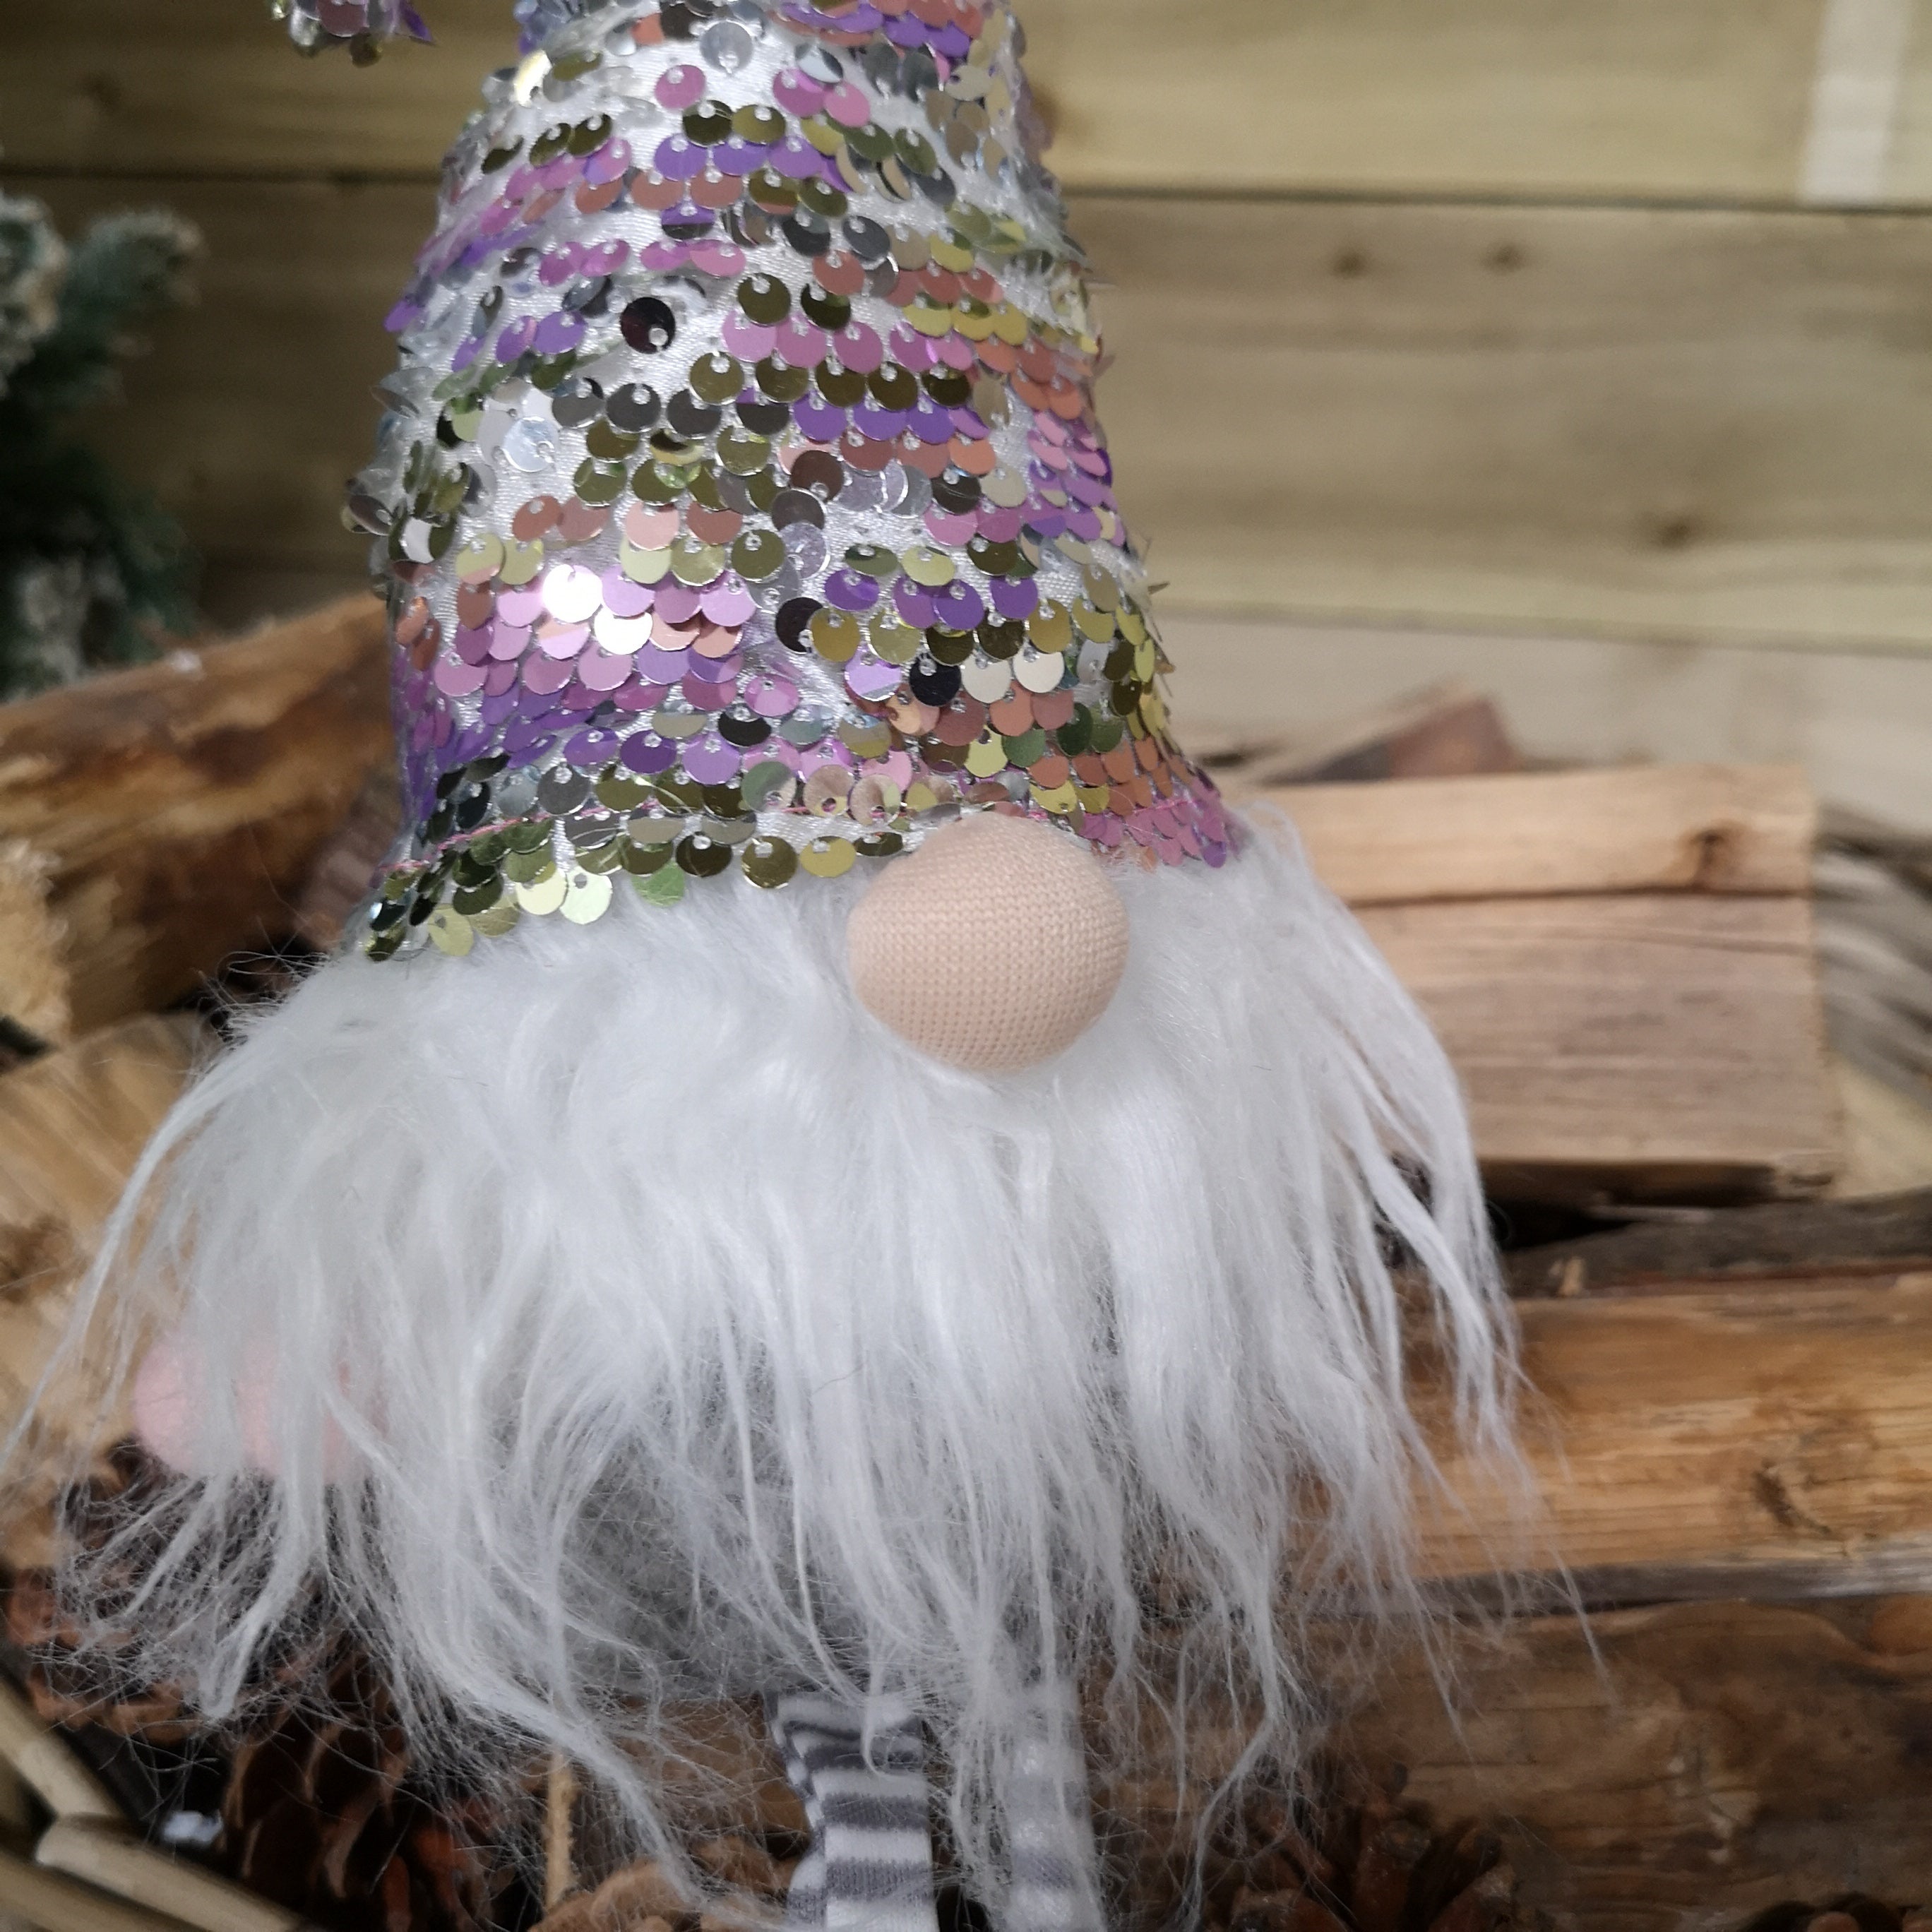 49cm Festive Christmas Sitting Gonk with Dangly Legs & Sequin Hat in Pink & Grey